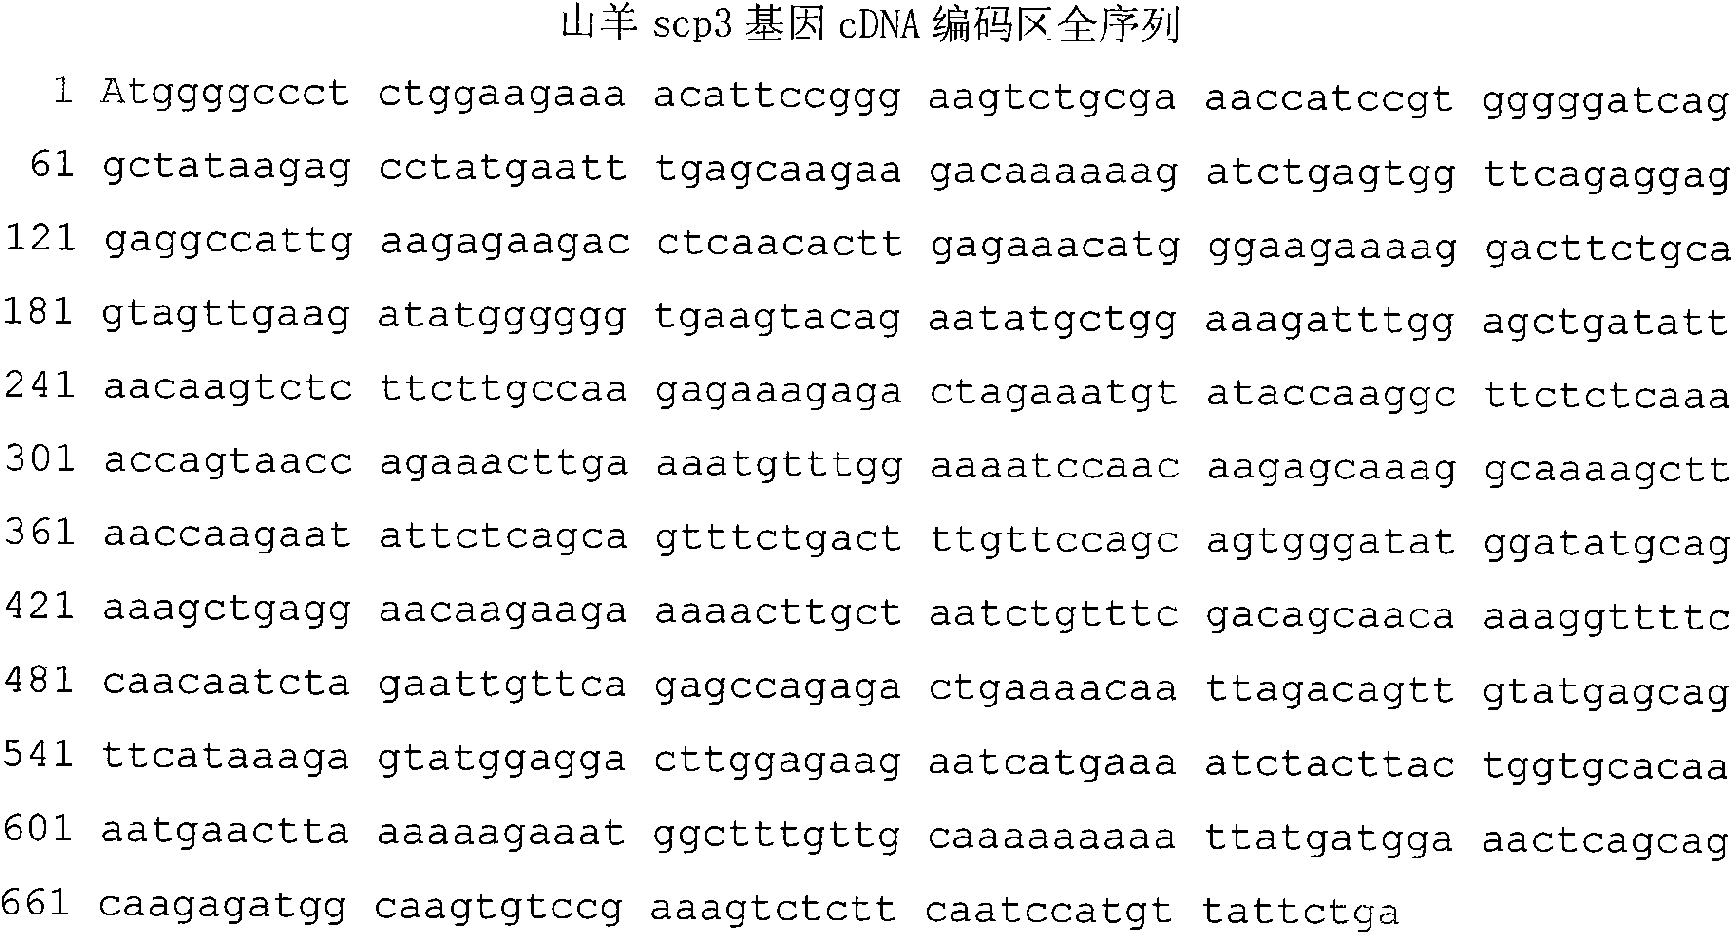 Nucleotide sequence of cDNA code area of goat Scp3 gene